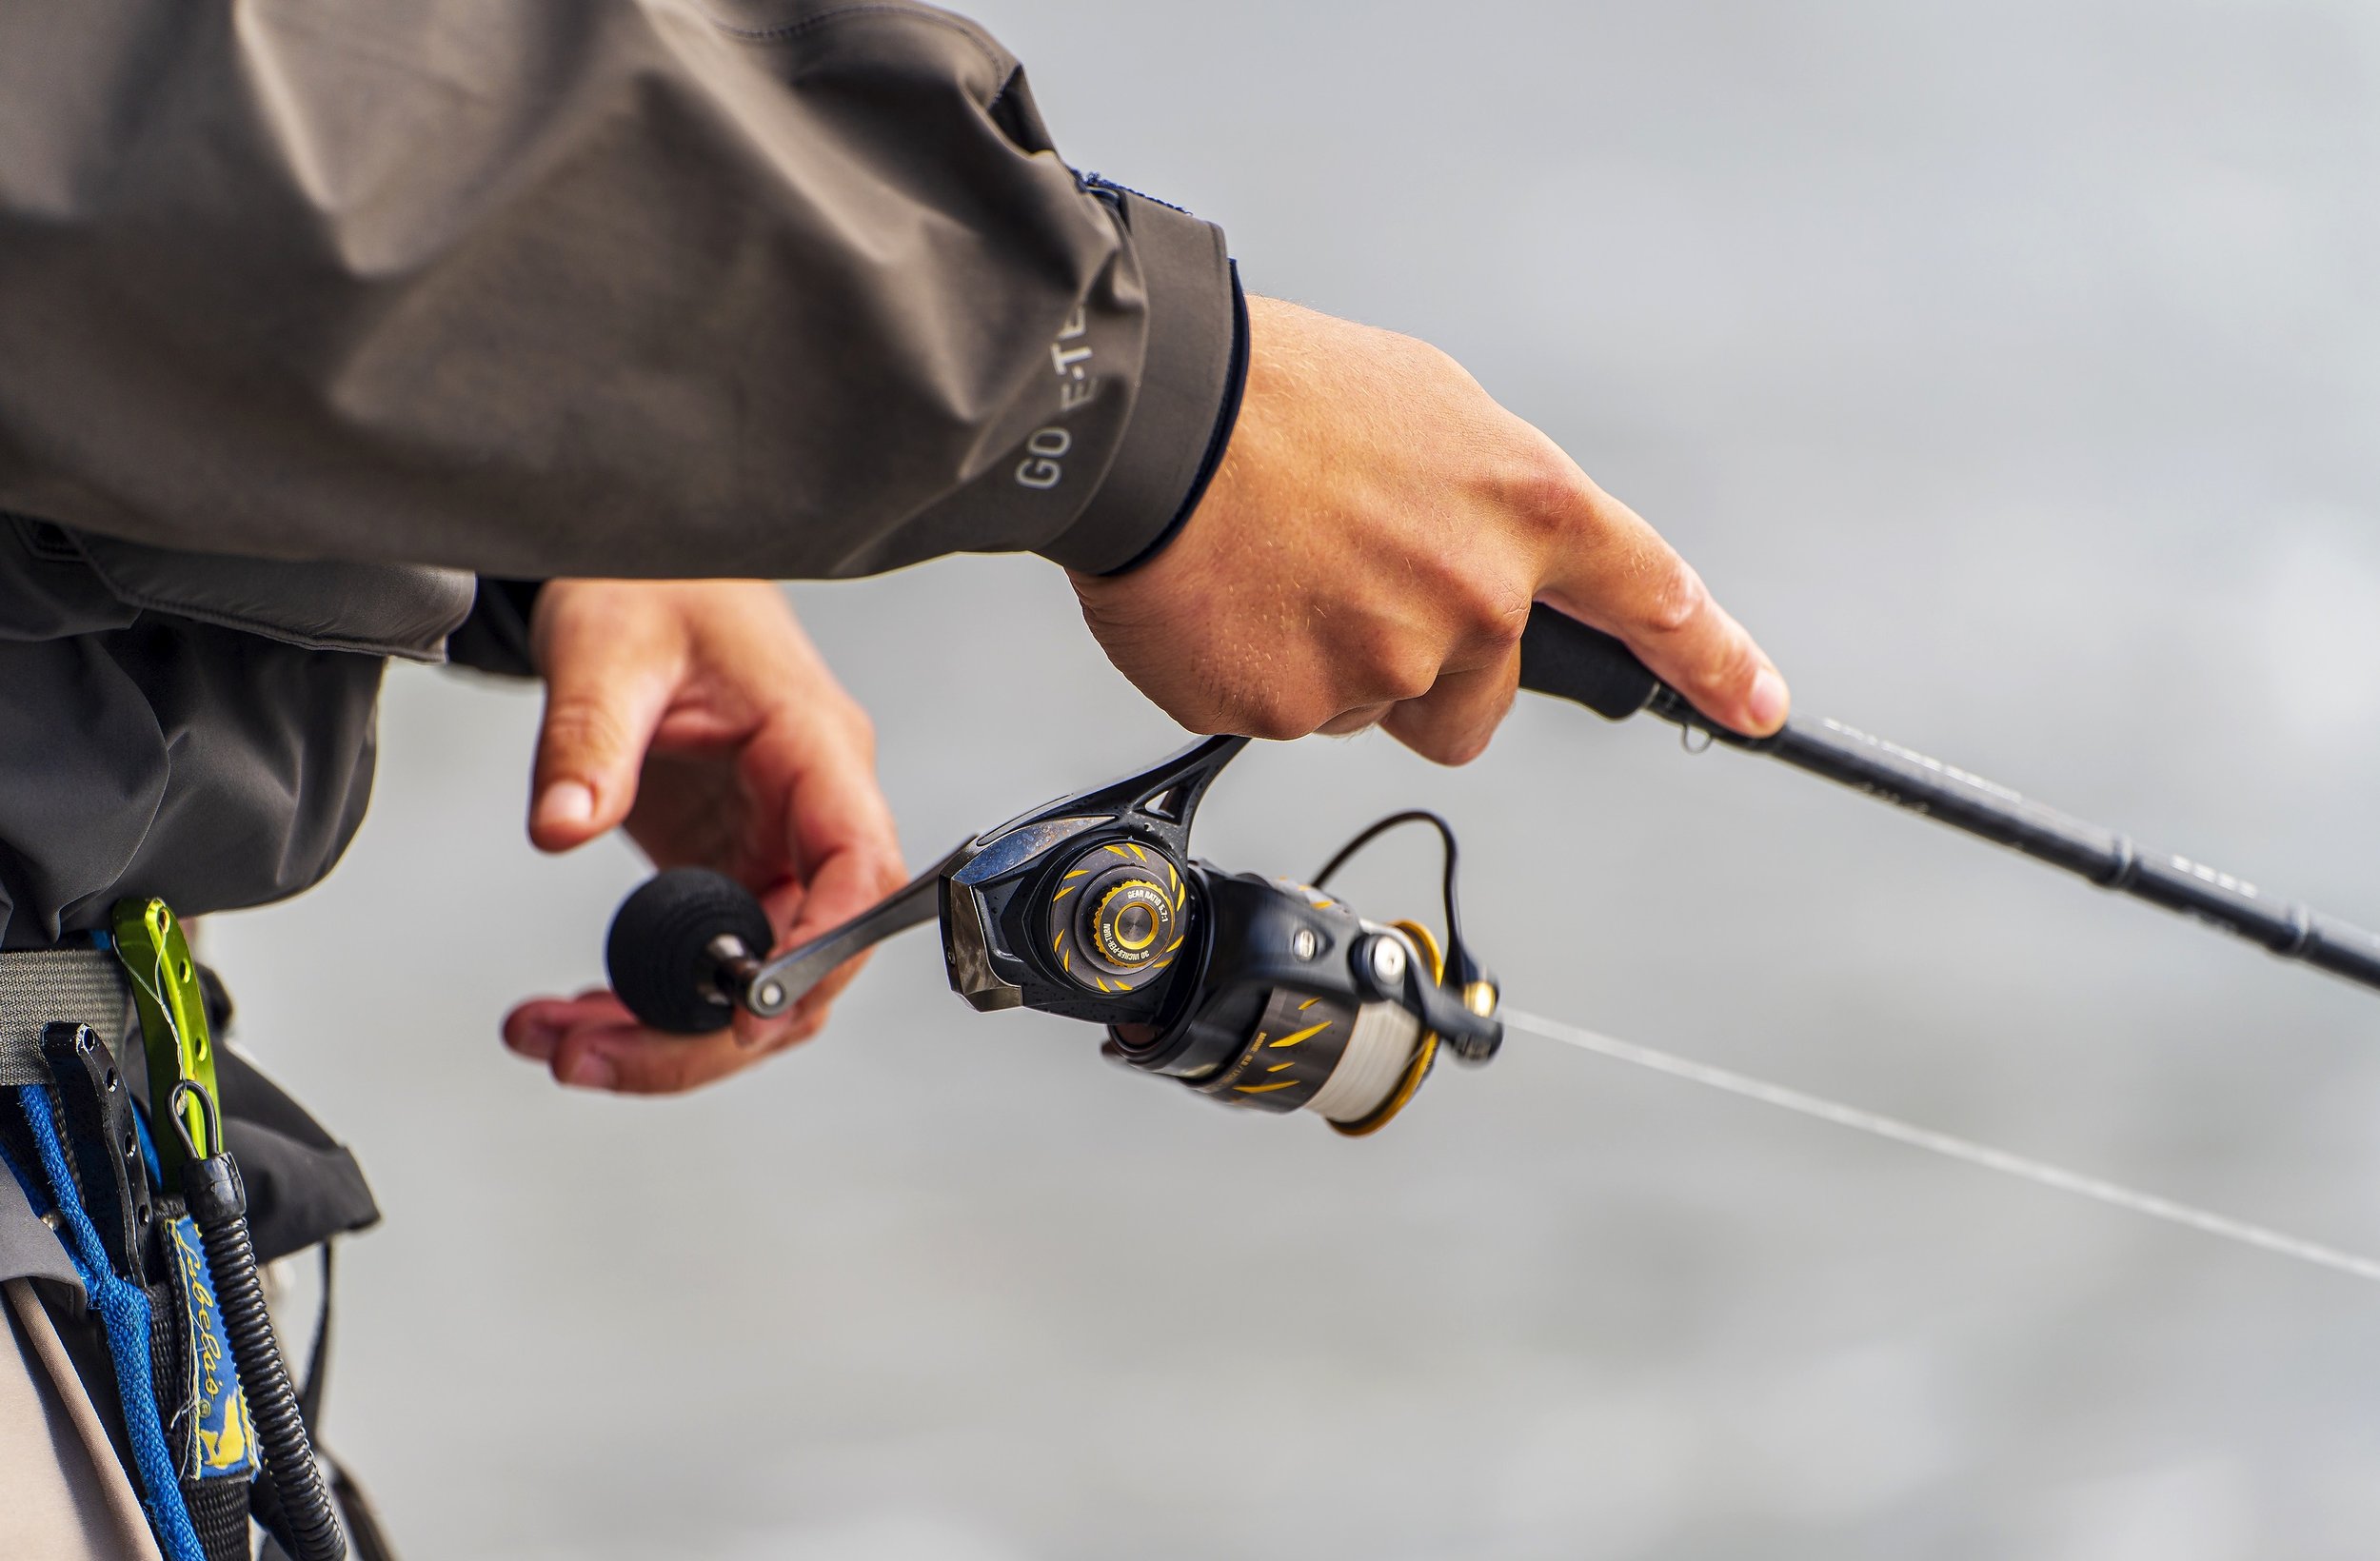 Here Are the Best Kids' Fishing Poles for All Kinds of Angling